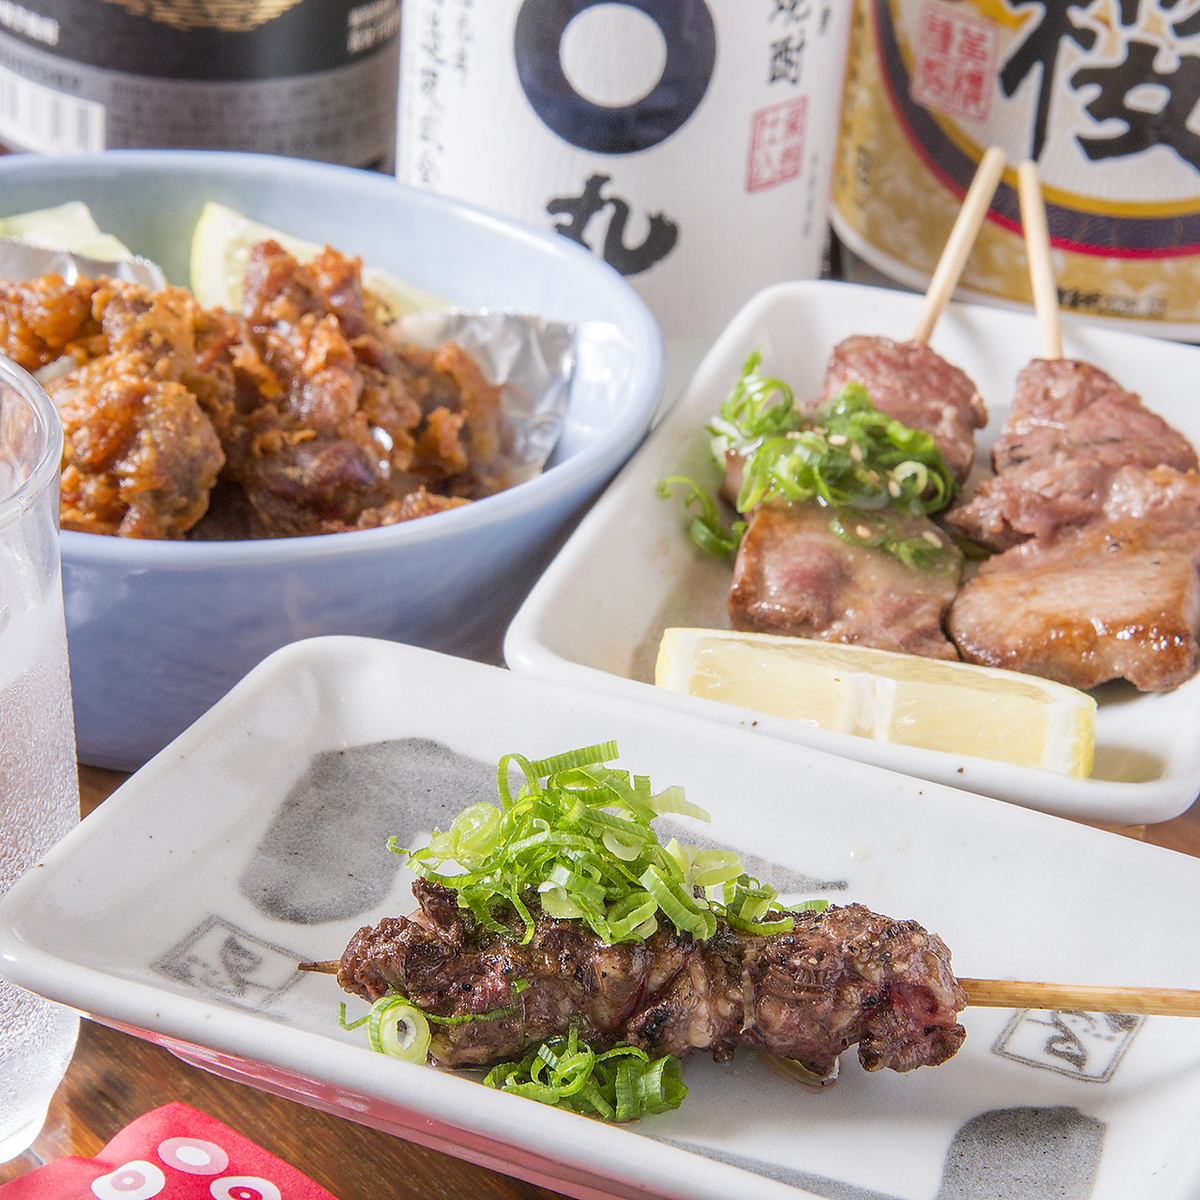 There are menus such as handmade tofu and deep-fried chicken skin that can only be found at the Kabe store!